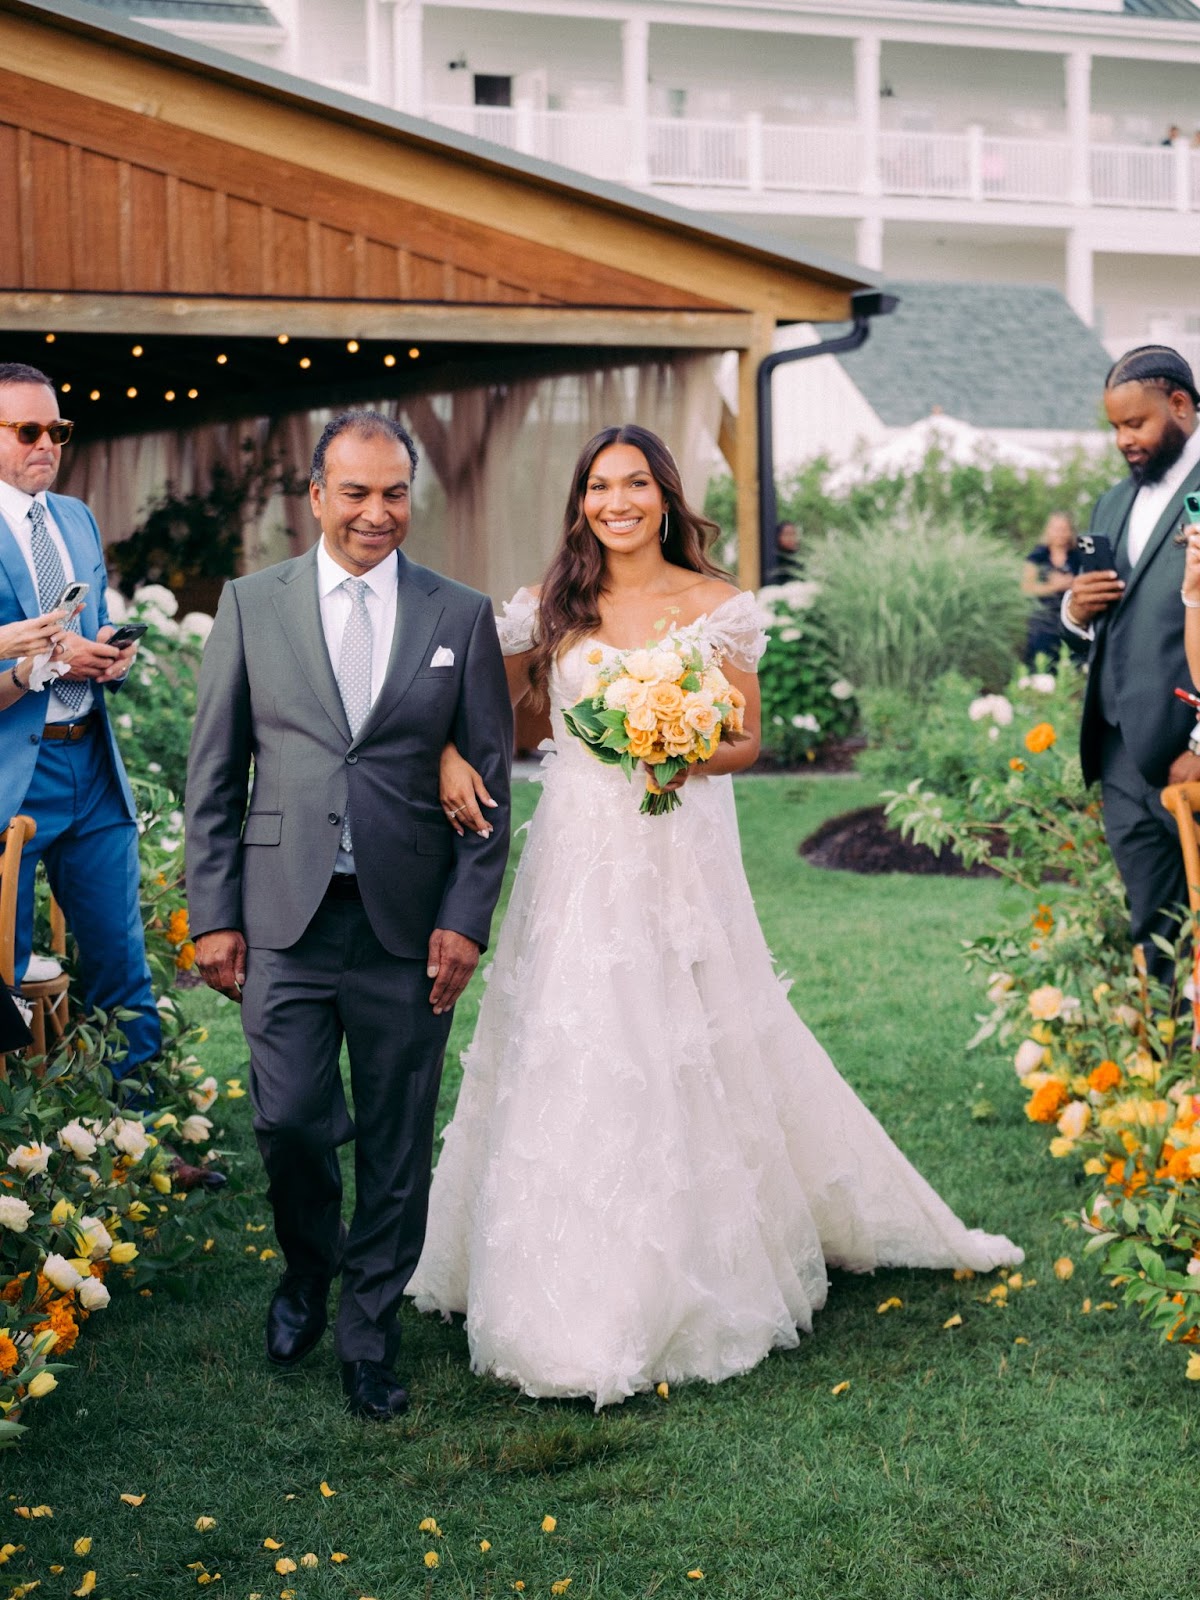 Tia and Michael's Earthy Destination Wedding in New York, USA